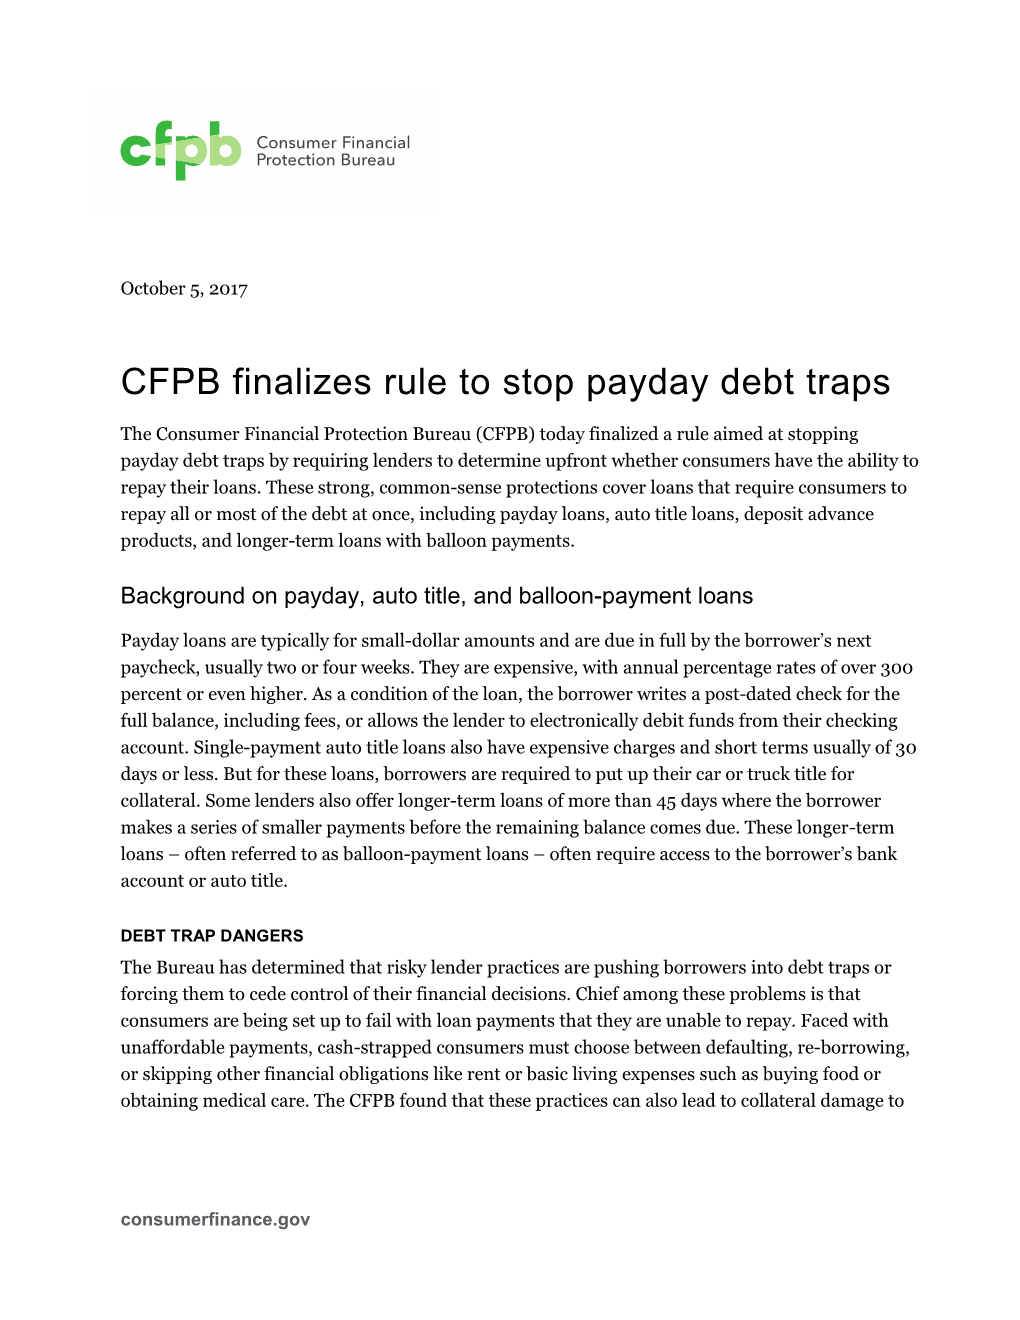 CFPB Finalizes Rule to Stop Payday Debt Traps